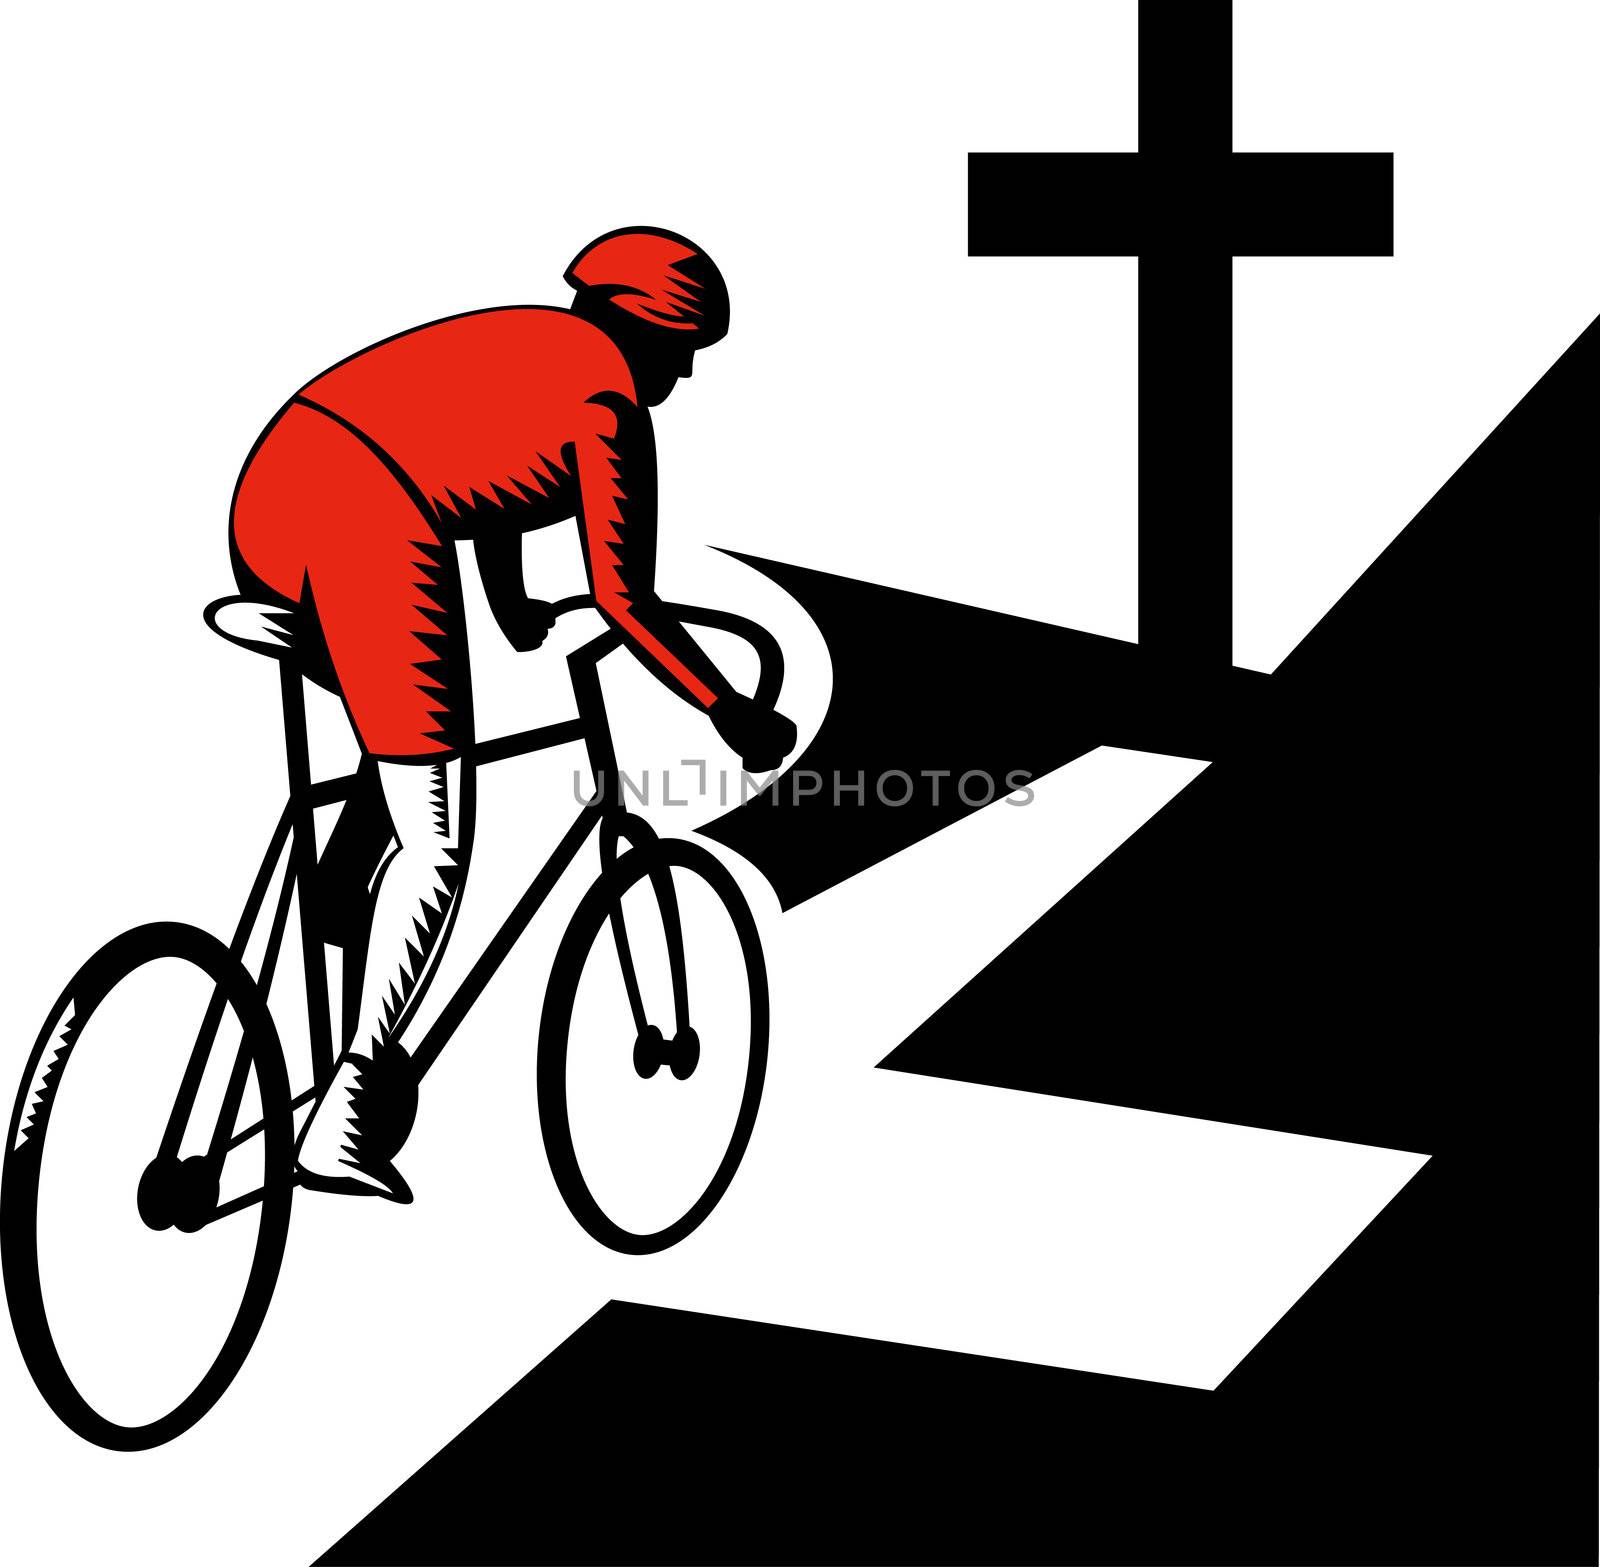 Cyclist racing on bicycle with cross on road by patrimonio